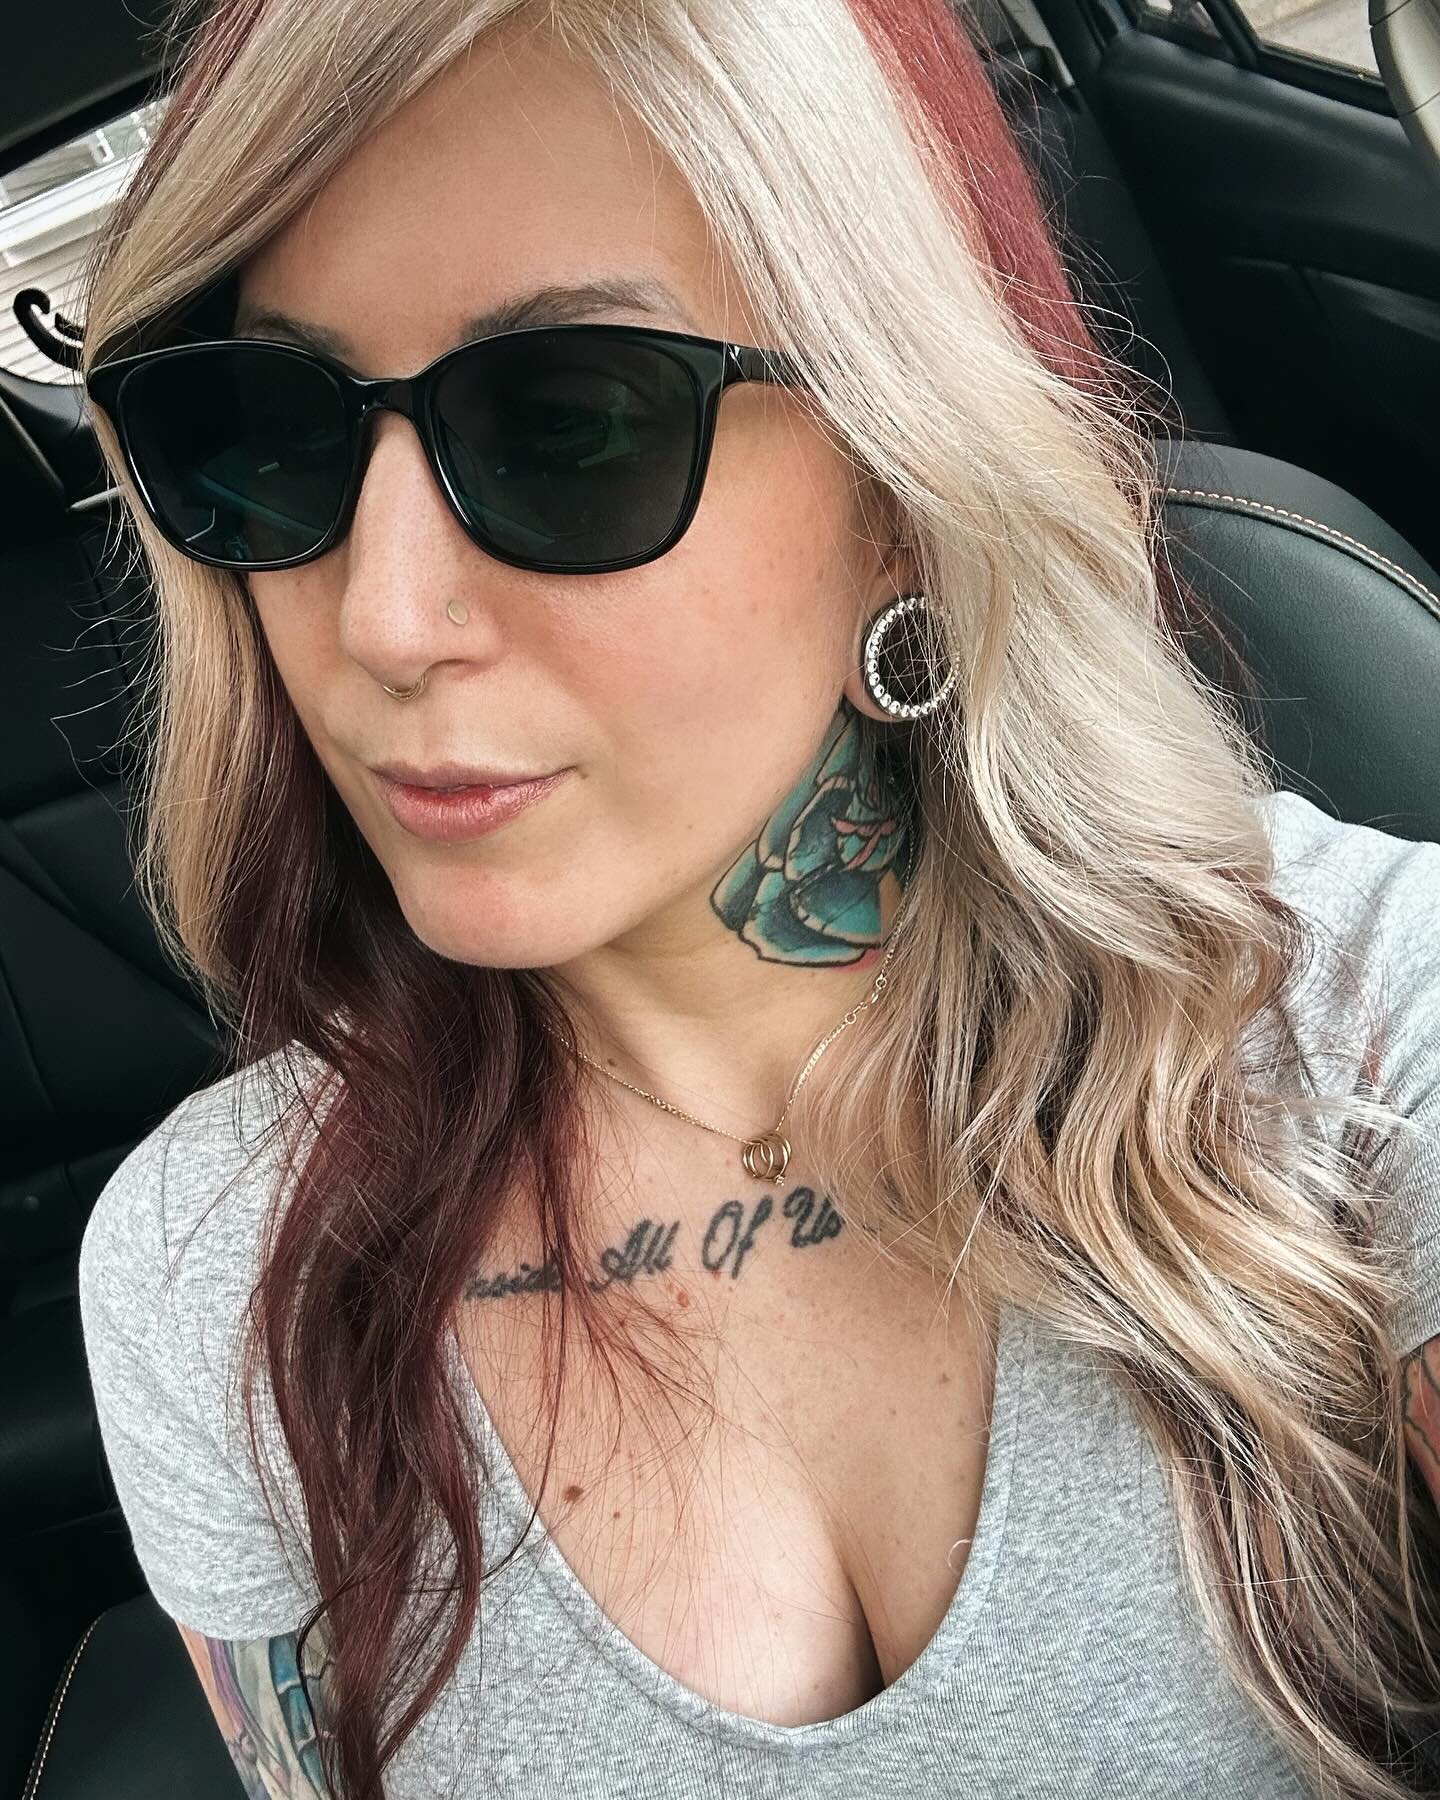 Went and saw my lovely friend @alinahdidmyhair today and we added some more white to my hair just to make sure everyone notices it 😯 It looks so good, Alinah always crushes it 🥰